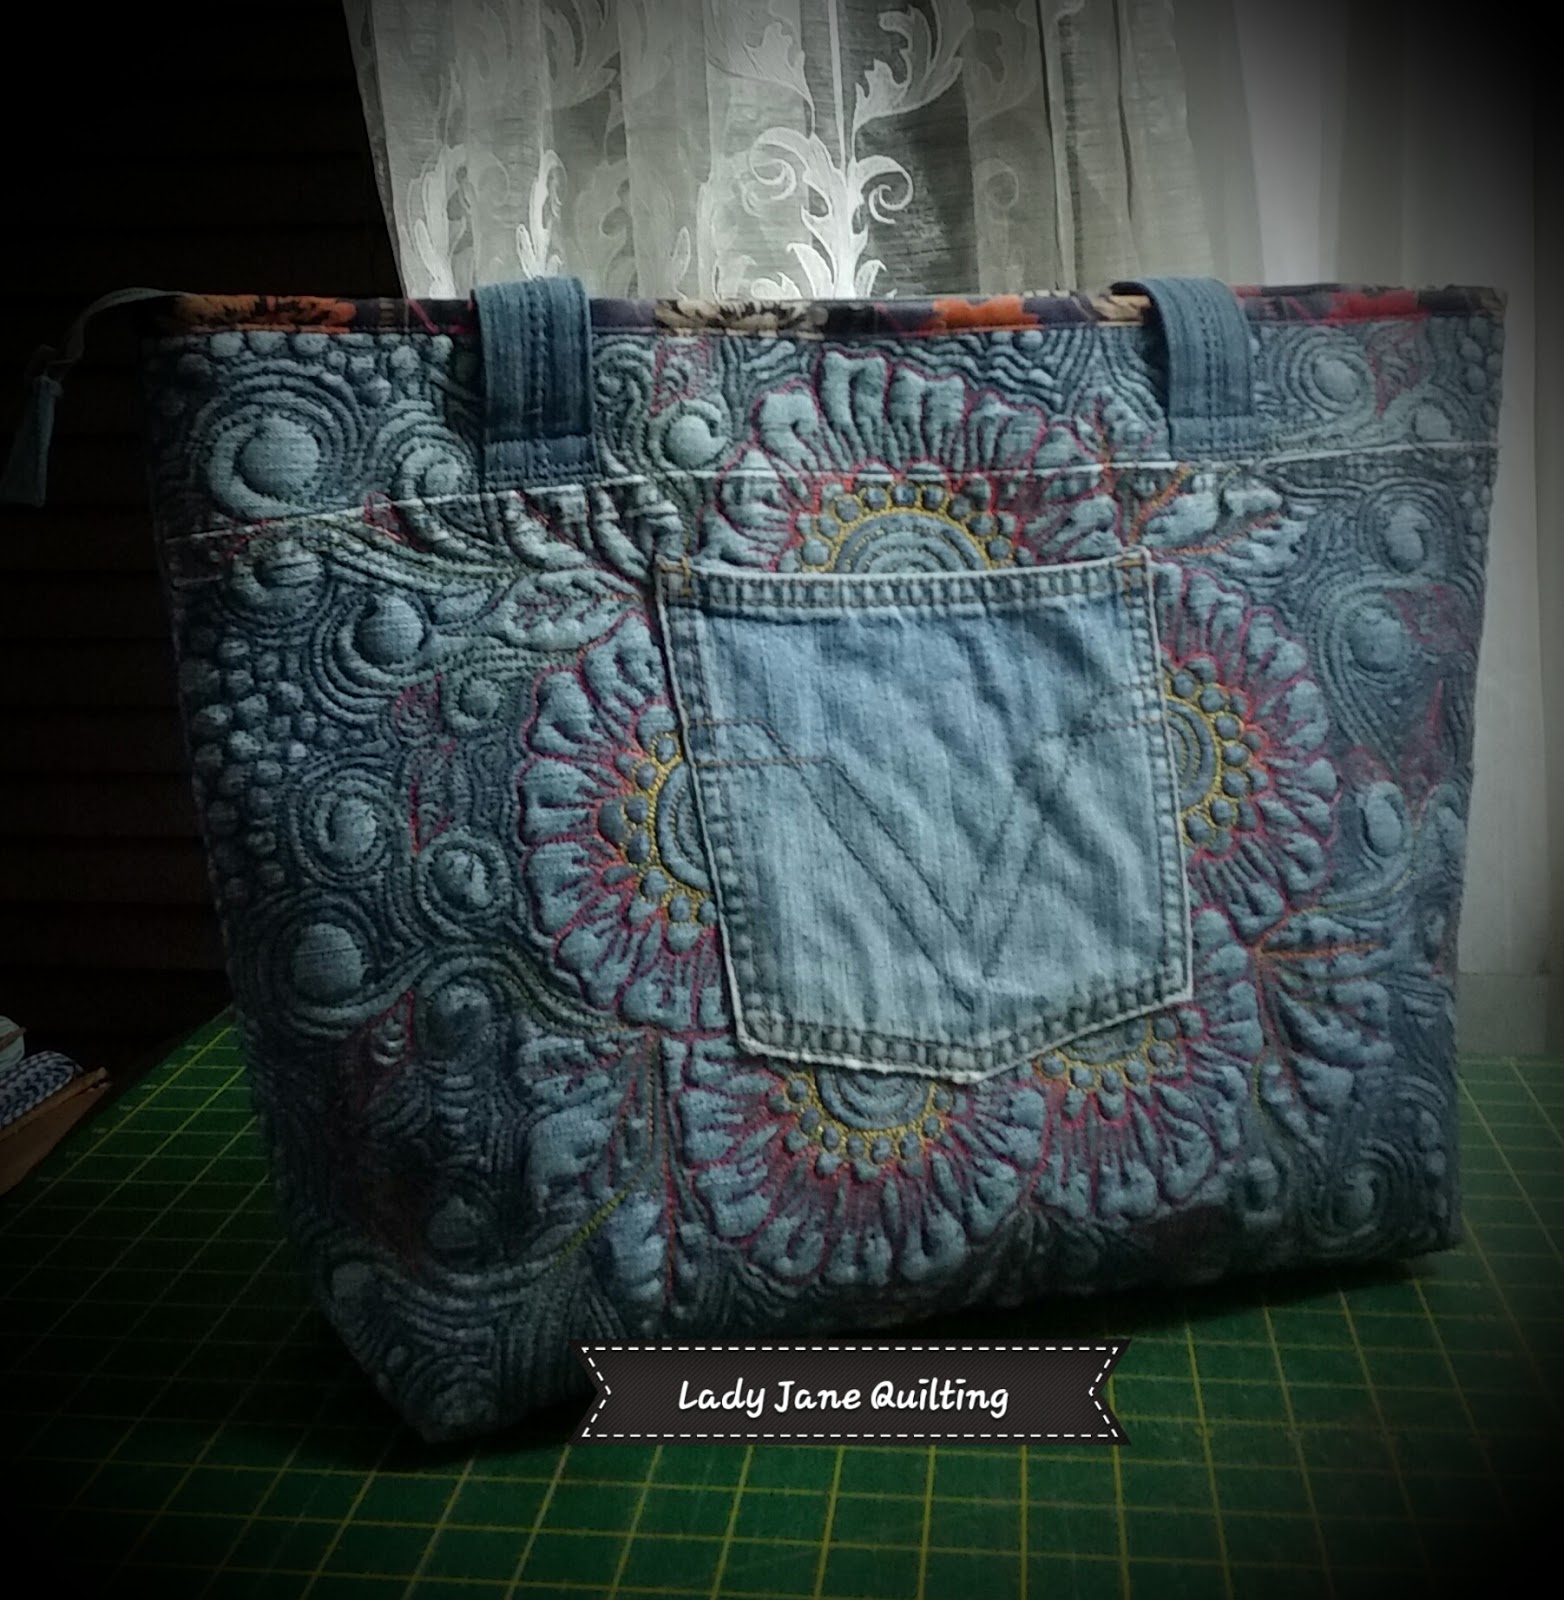 Lady Jane Quilting: April 2016